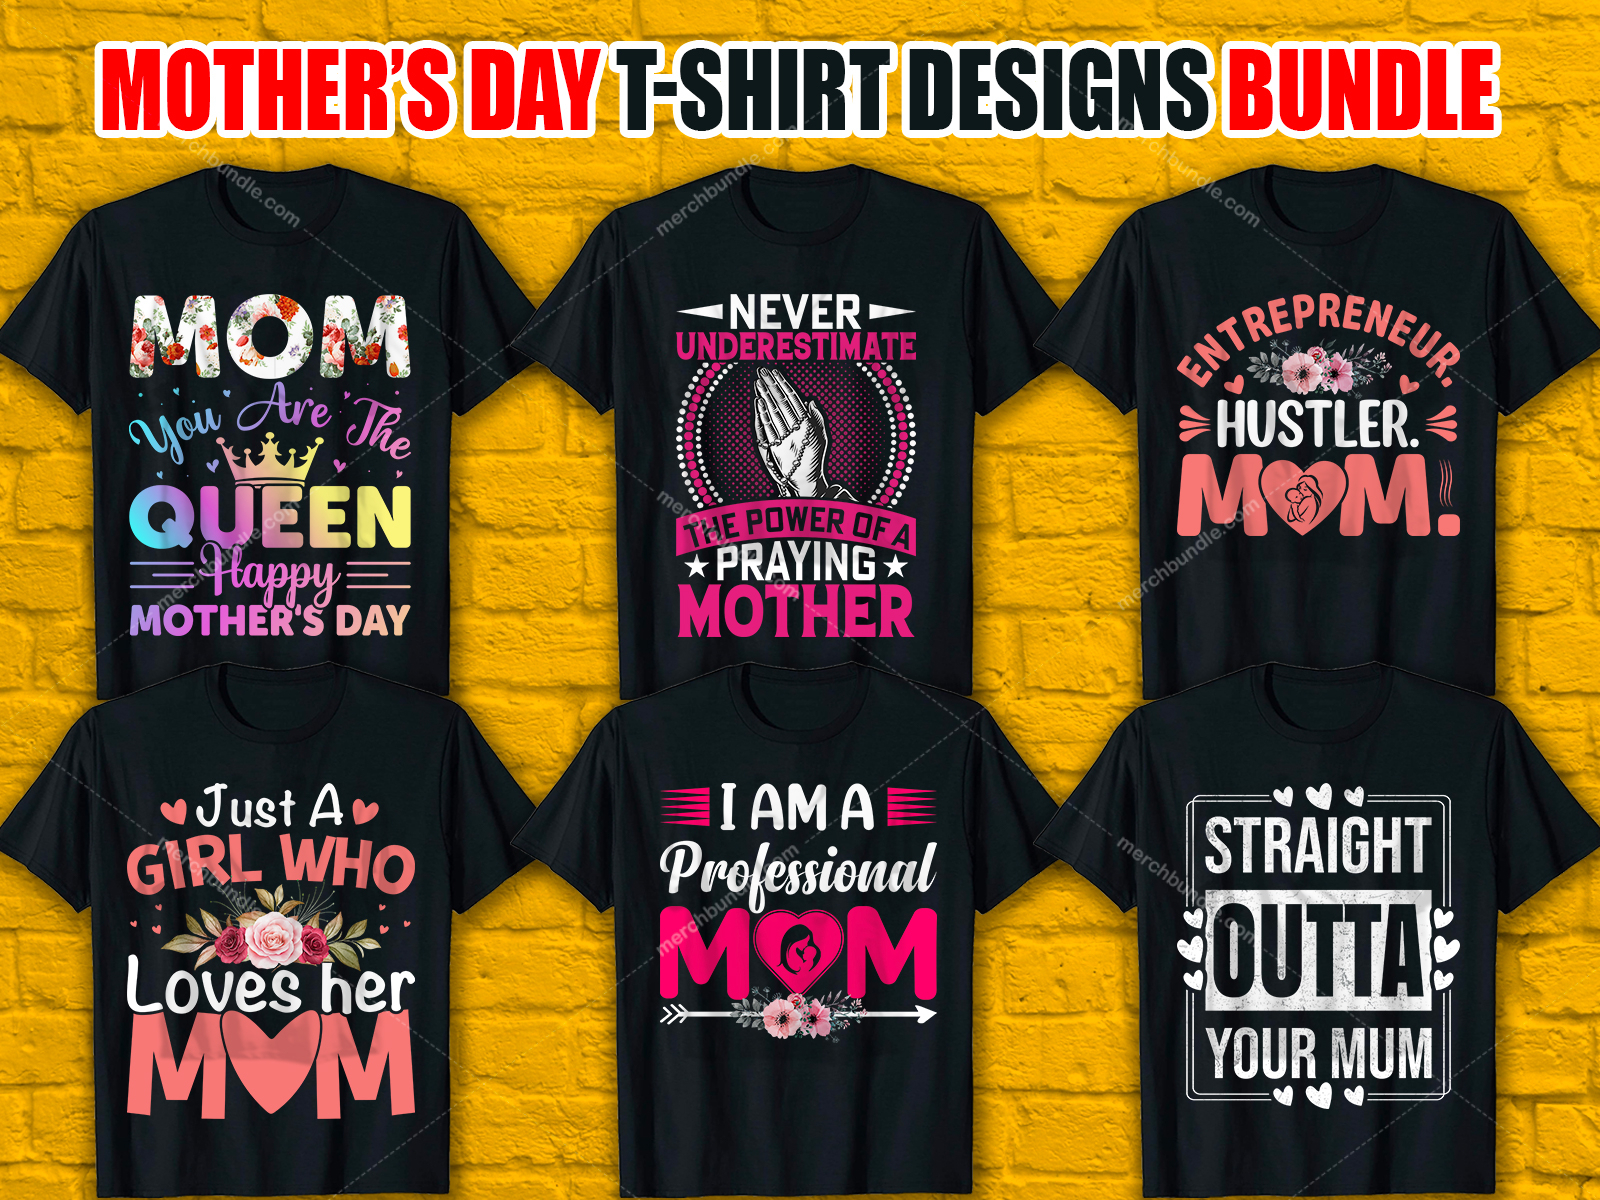 Mother's Day T Shirt Designs Bundle by Shagor Khan on Dribbble